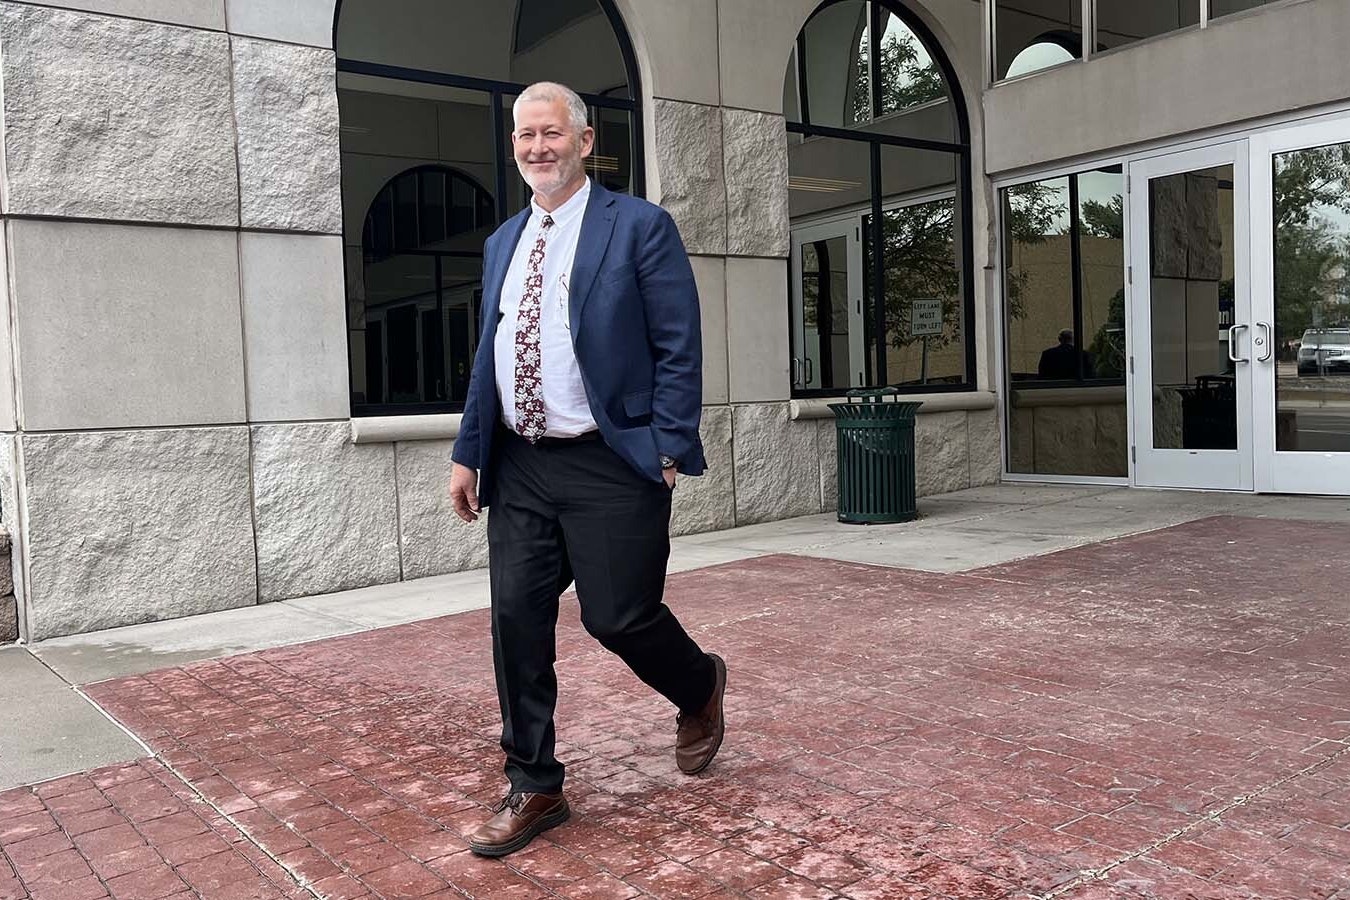 Former Wyoming Superintendent of Public Instruction Brian Schroeder walks out of the Laramie County courthouse and government complex in downtown Cheyenne after a court hearing.